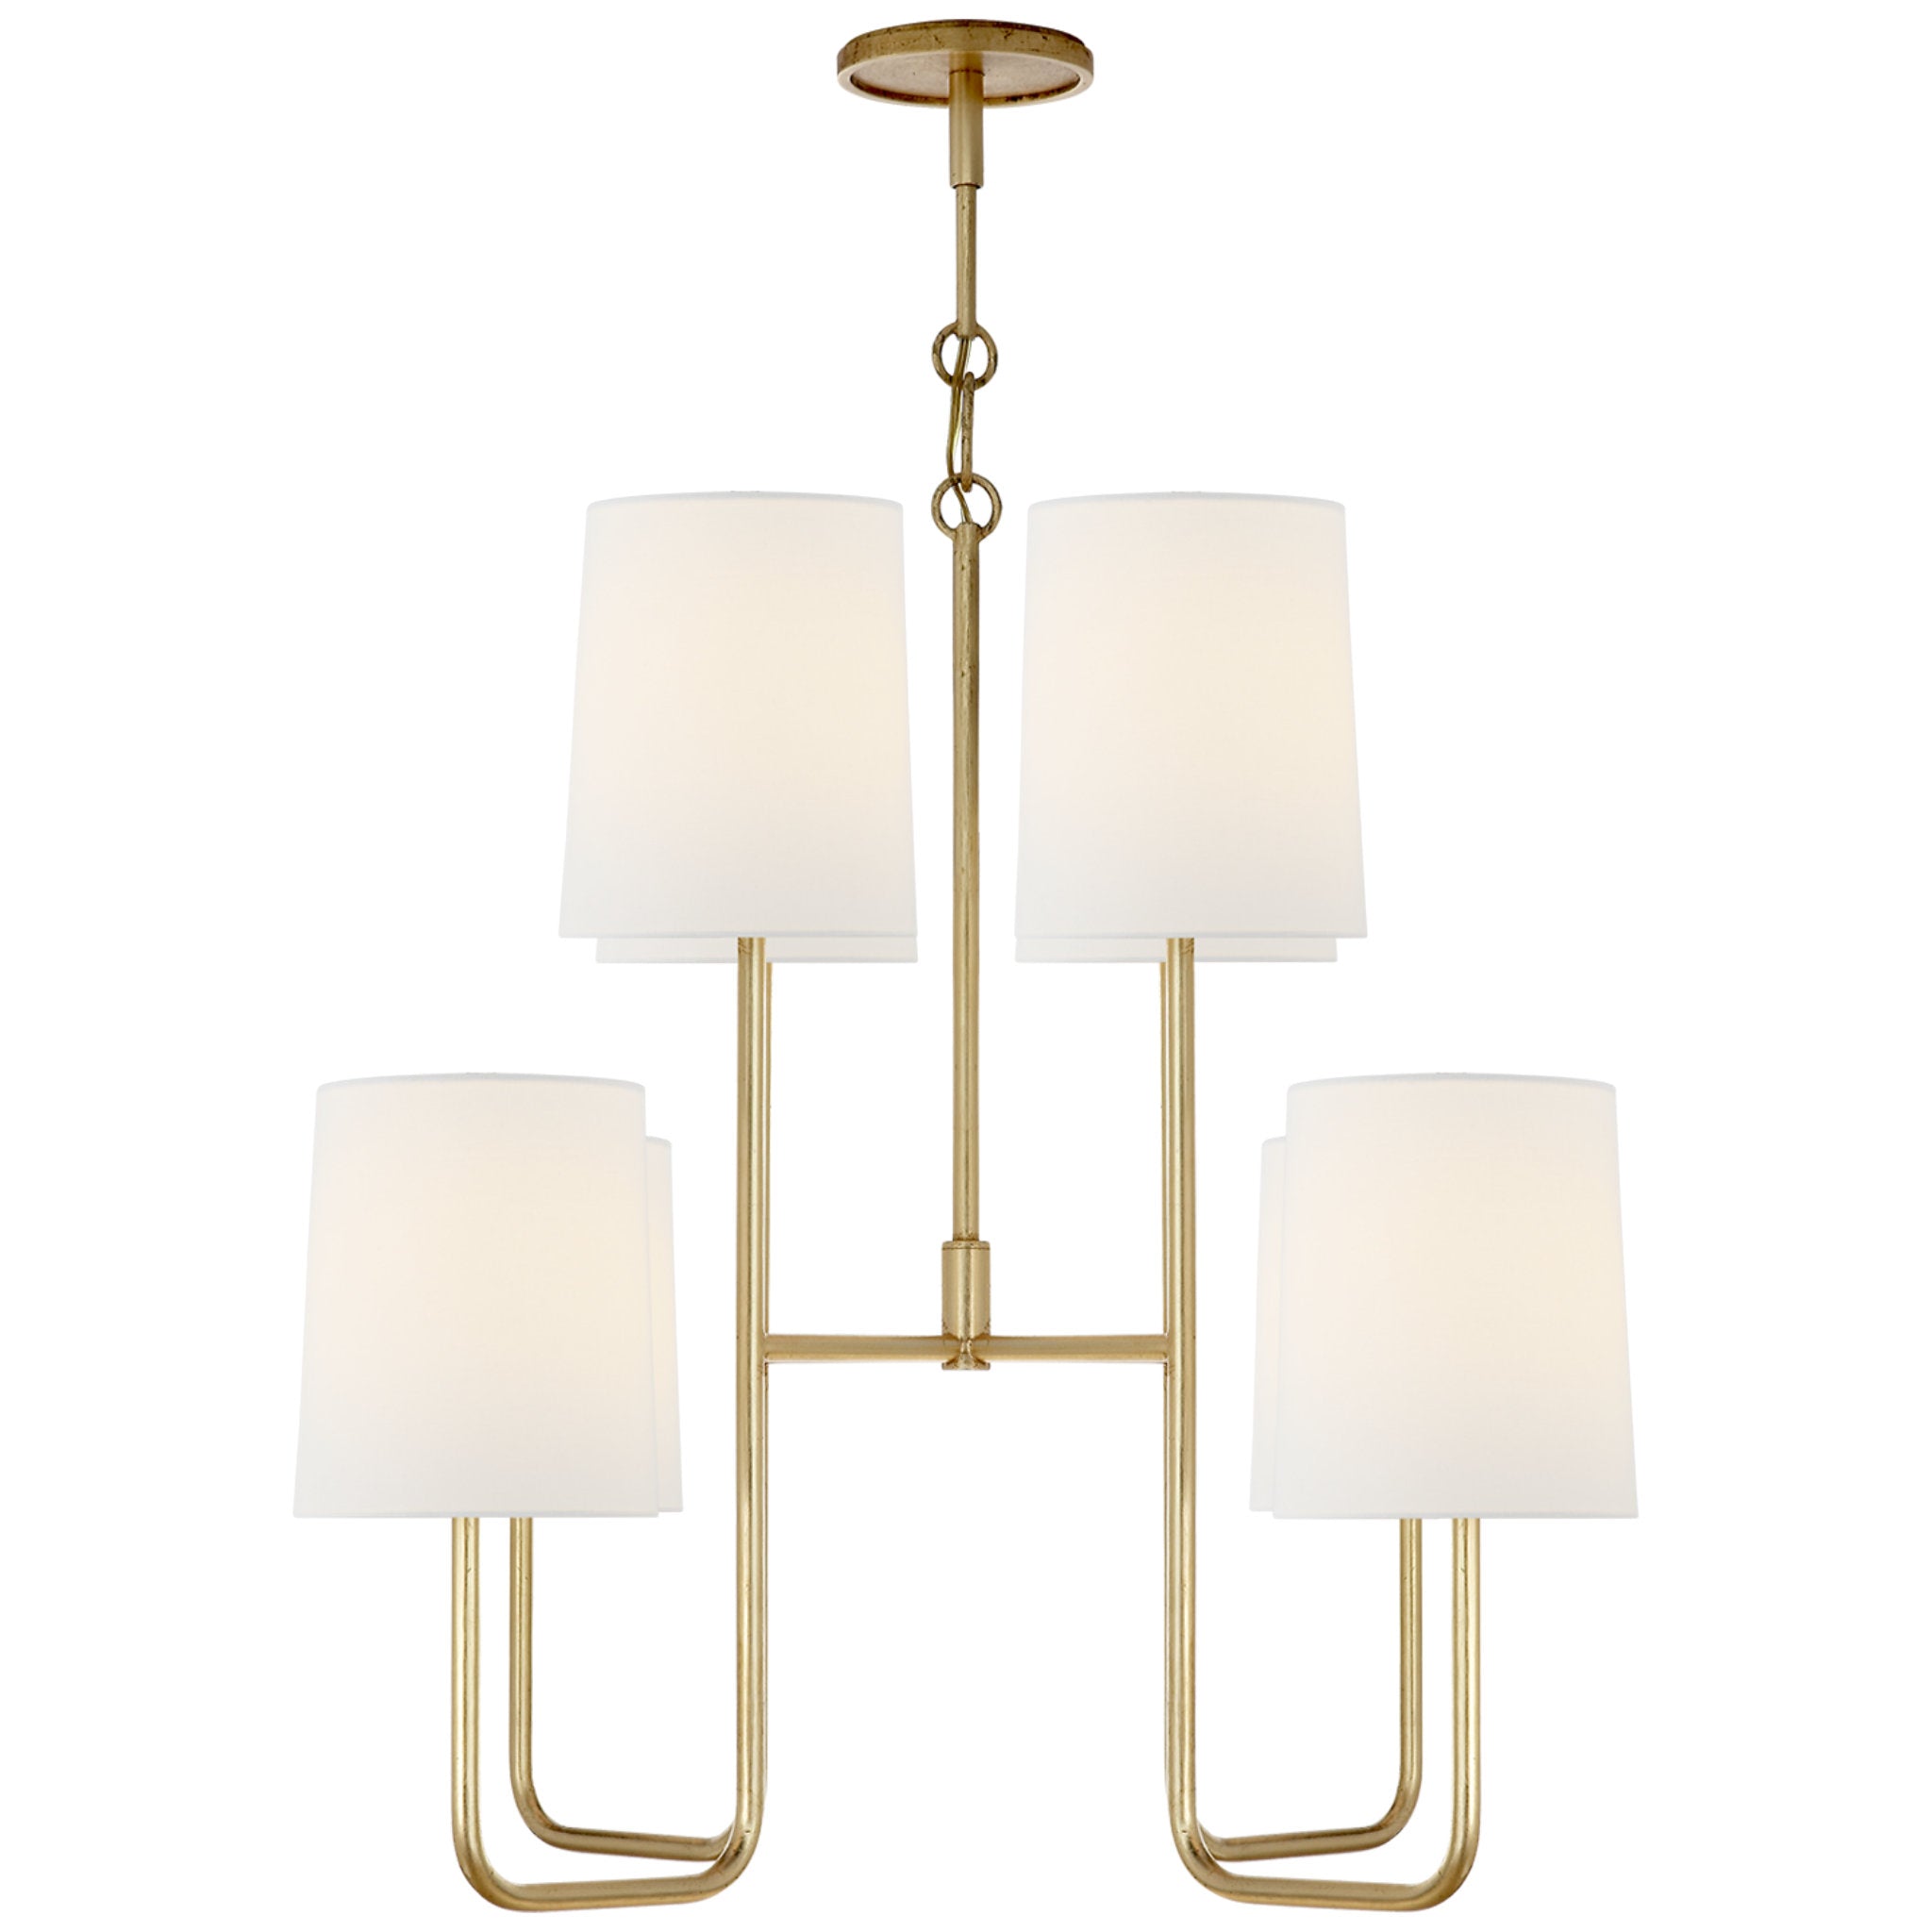 Barbara Barry Go Lightly Medium Chandelier in Gilded with Linen Shades